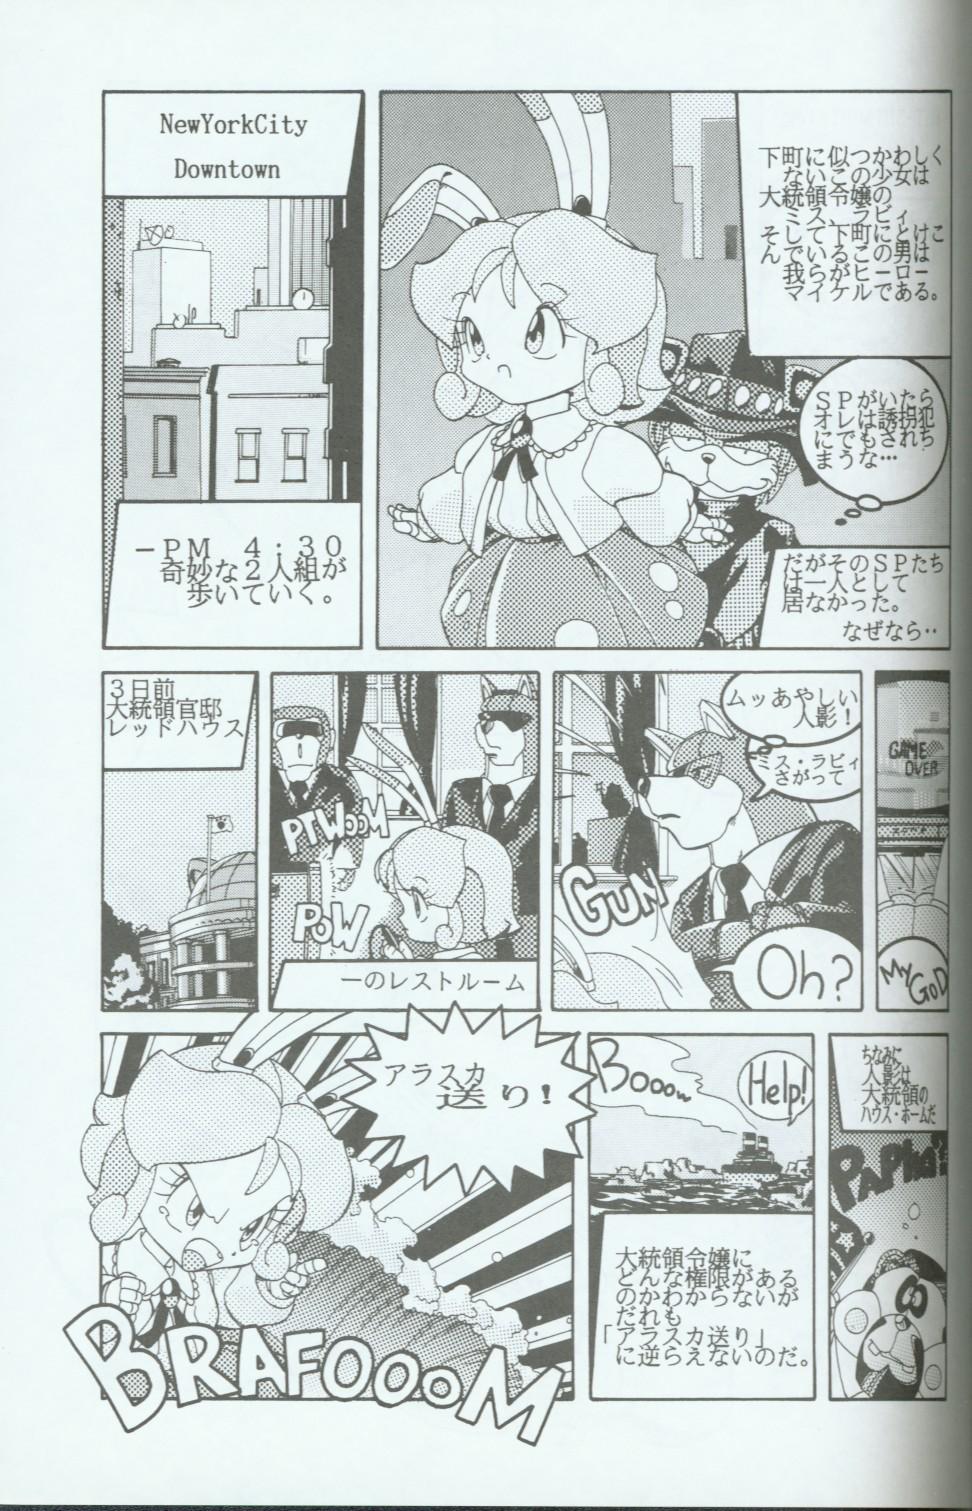 Cheating Cattou Ninden Teyandee Ryou - Samurai pizza cats Blowjob - Page 52